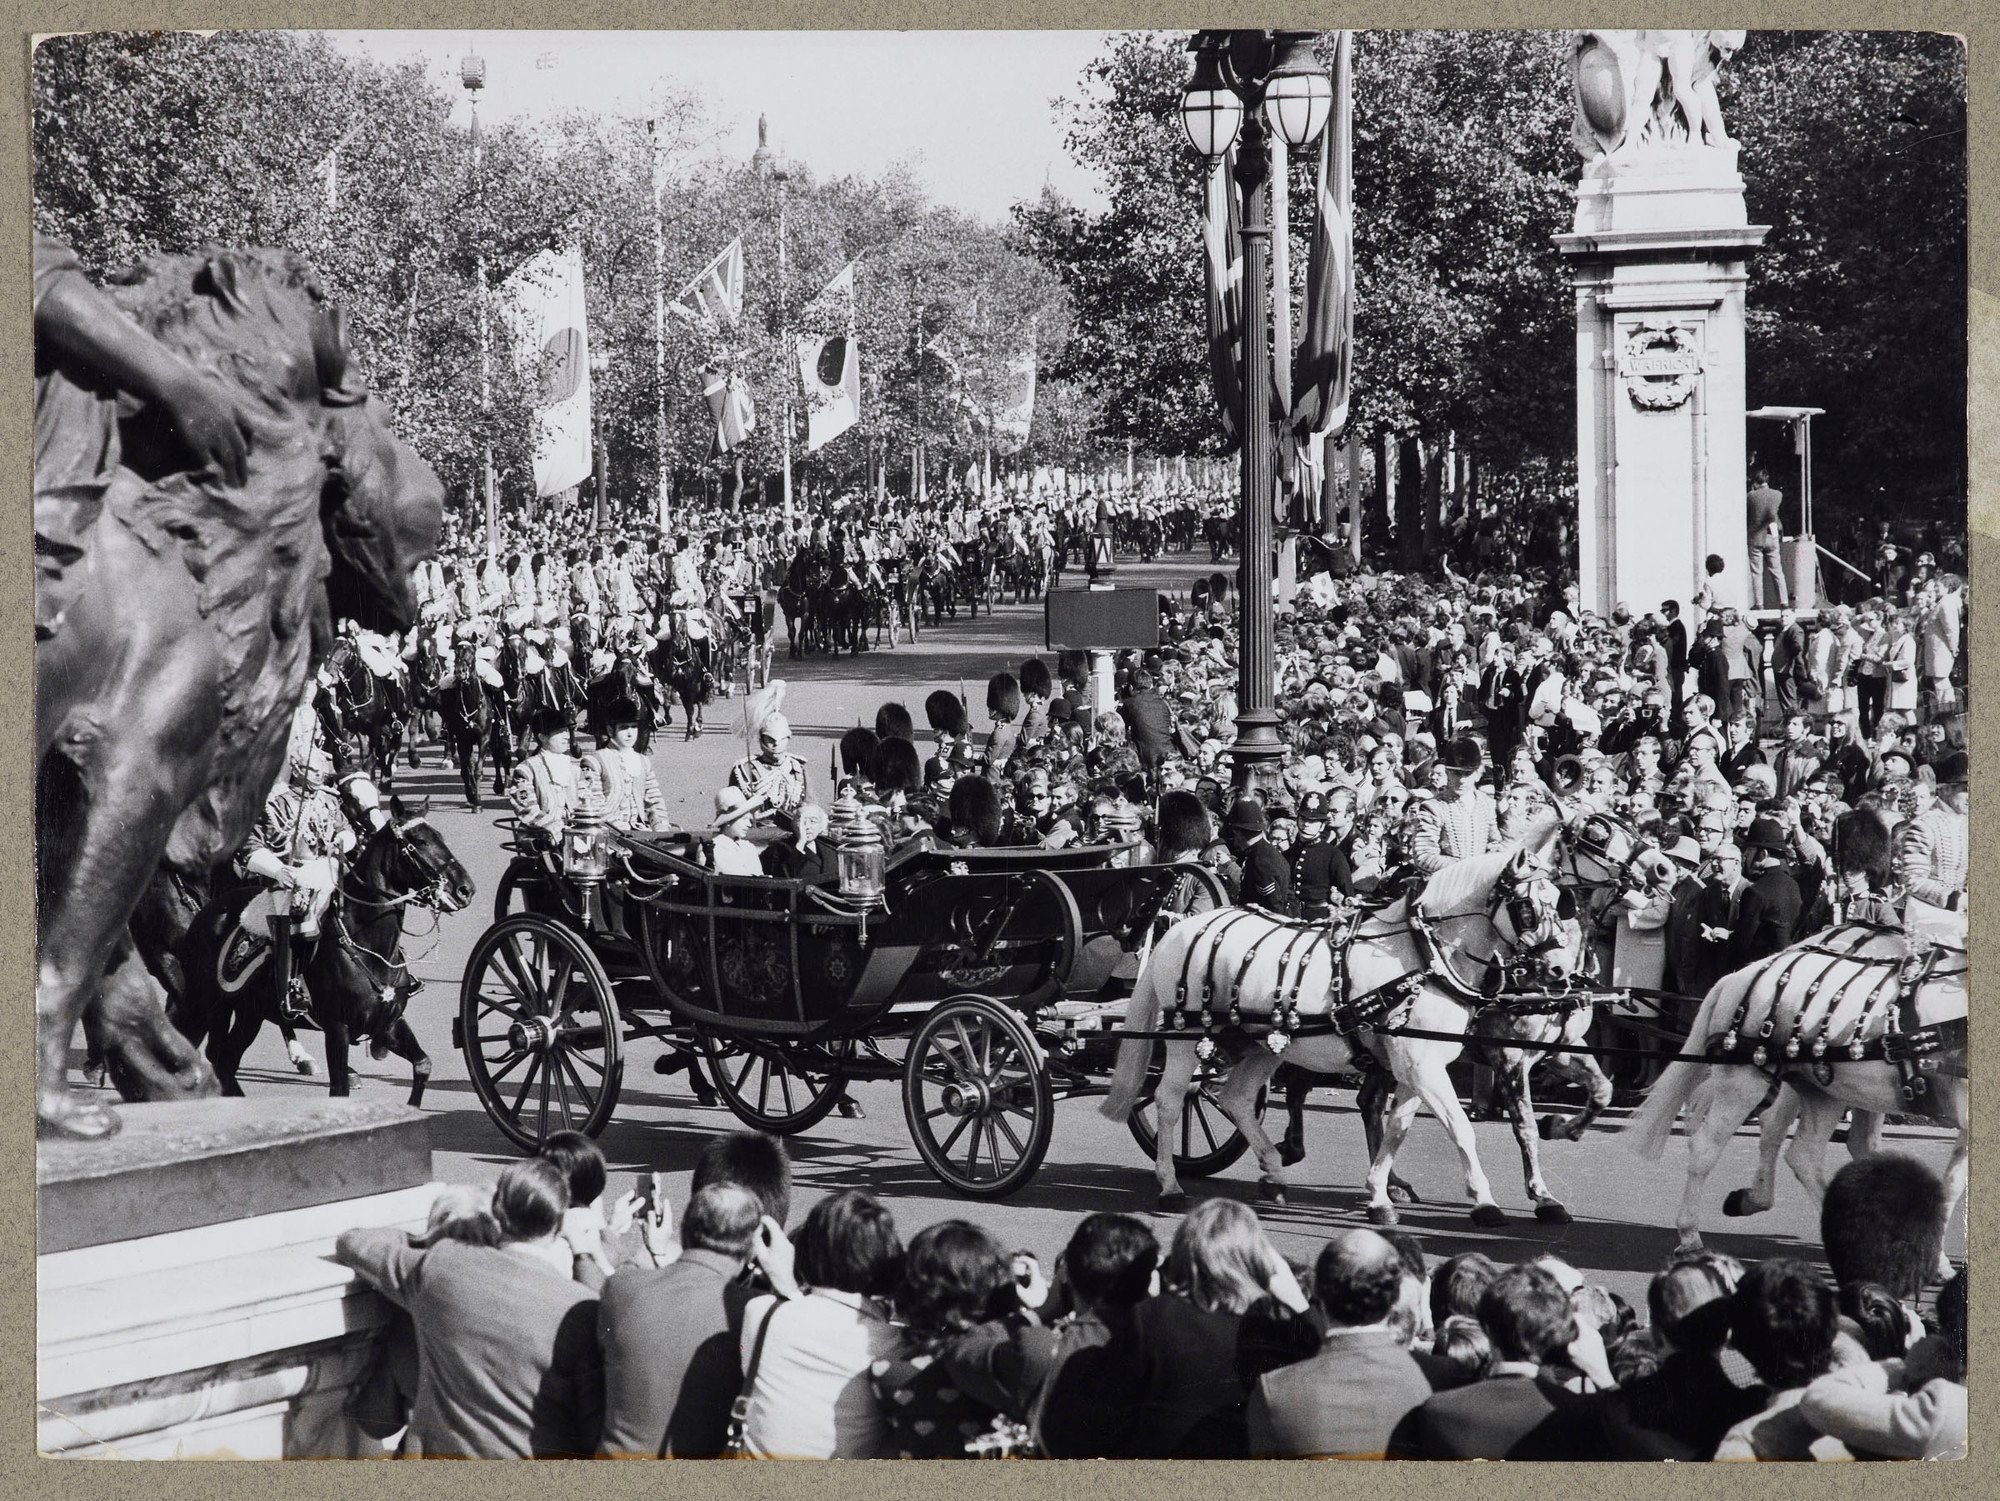 Photograph of a general view looking down the Mall from the Queen Victoria Memorial statue with St James' Park on the right&nbsp;where thousands of people wave to Emperor Hirohito who rides alongside HM the Queen in a carriage during&nbsp;the State Drive 